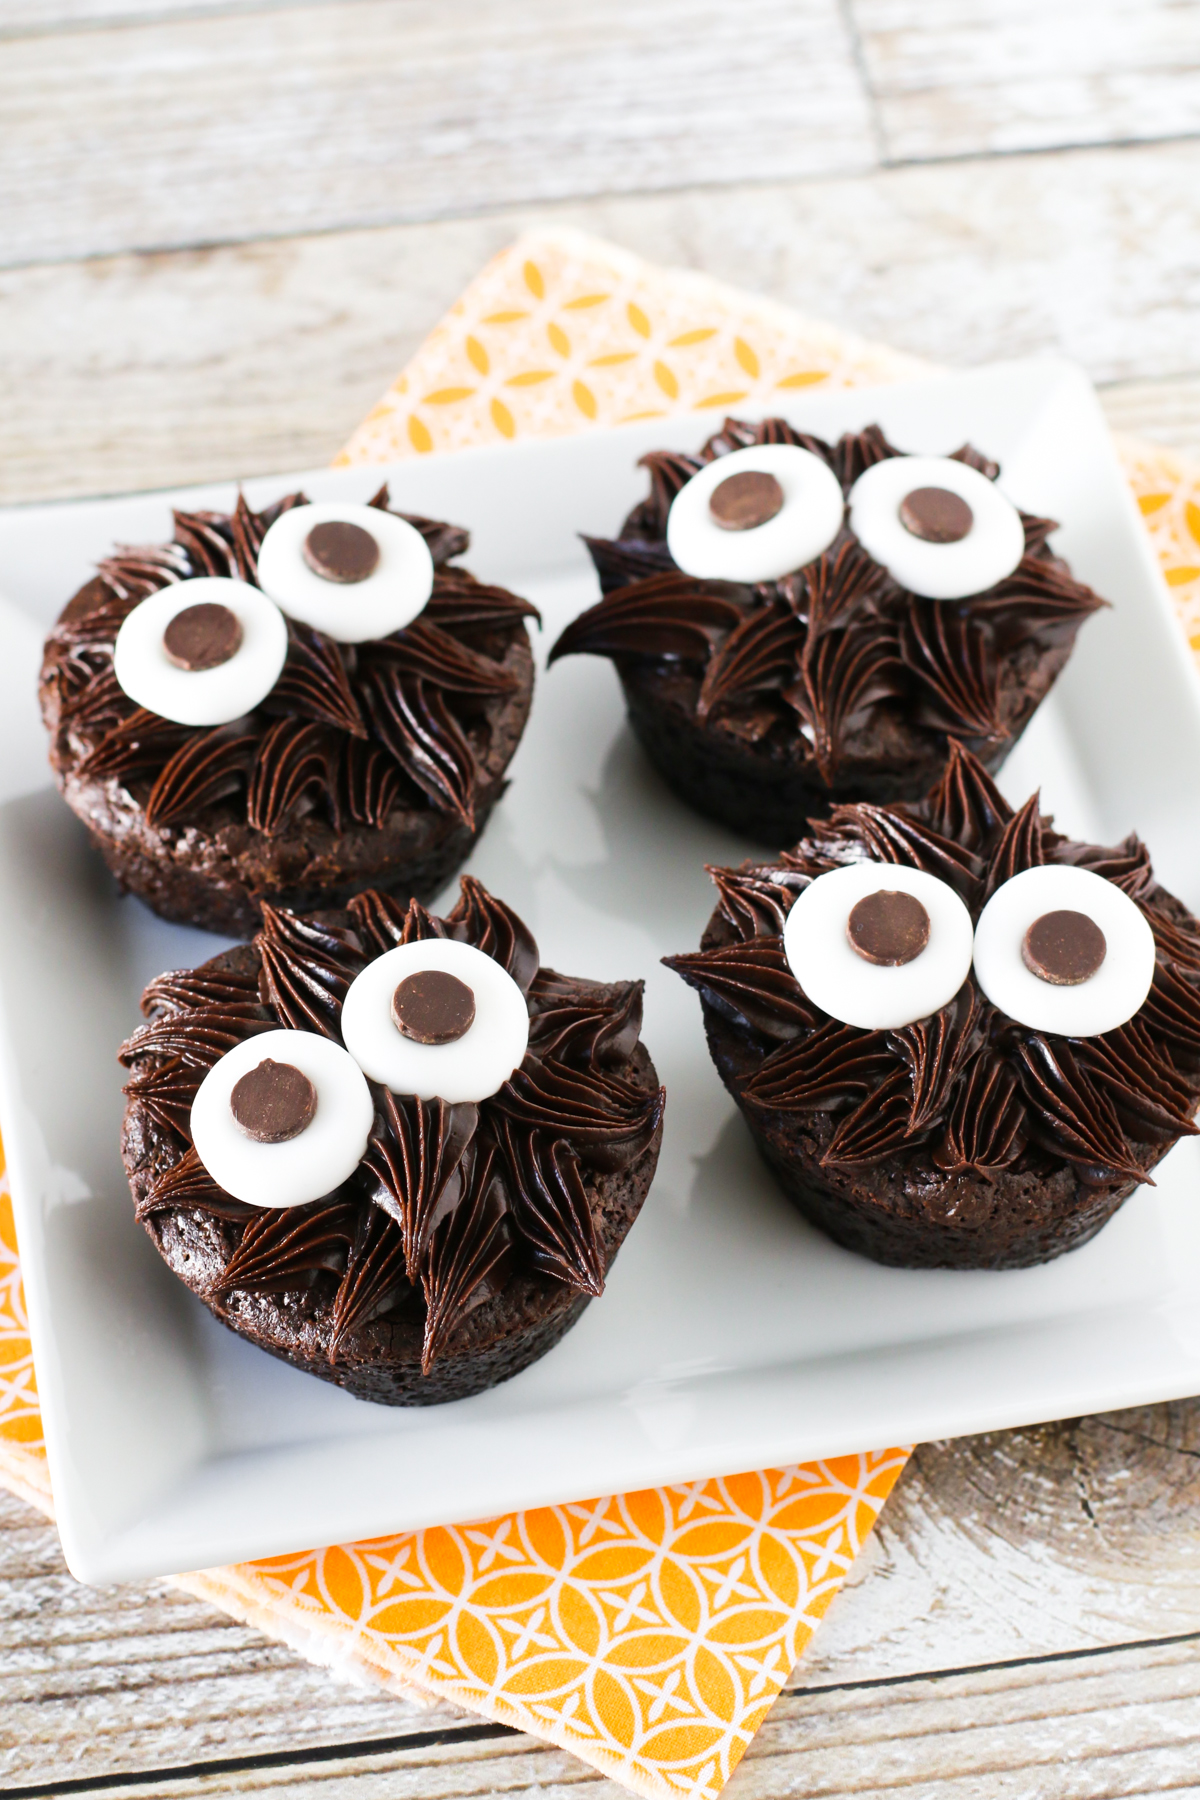 Gluten Free Vegan Chocolate Monster Brownies. These adorable frosted brownies are allergen free and spooktacular!